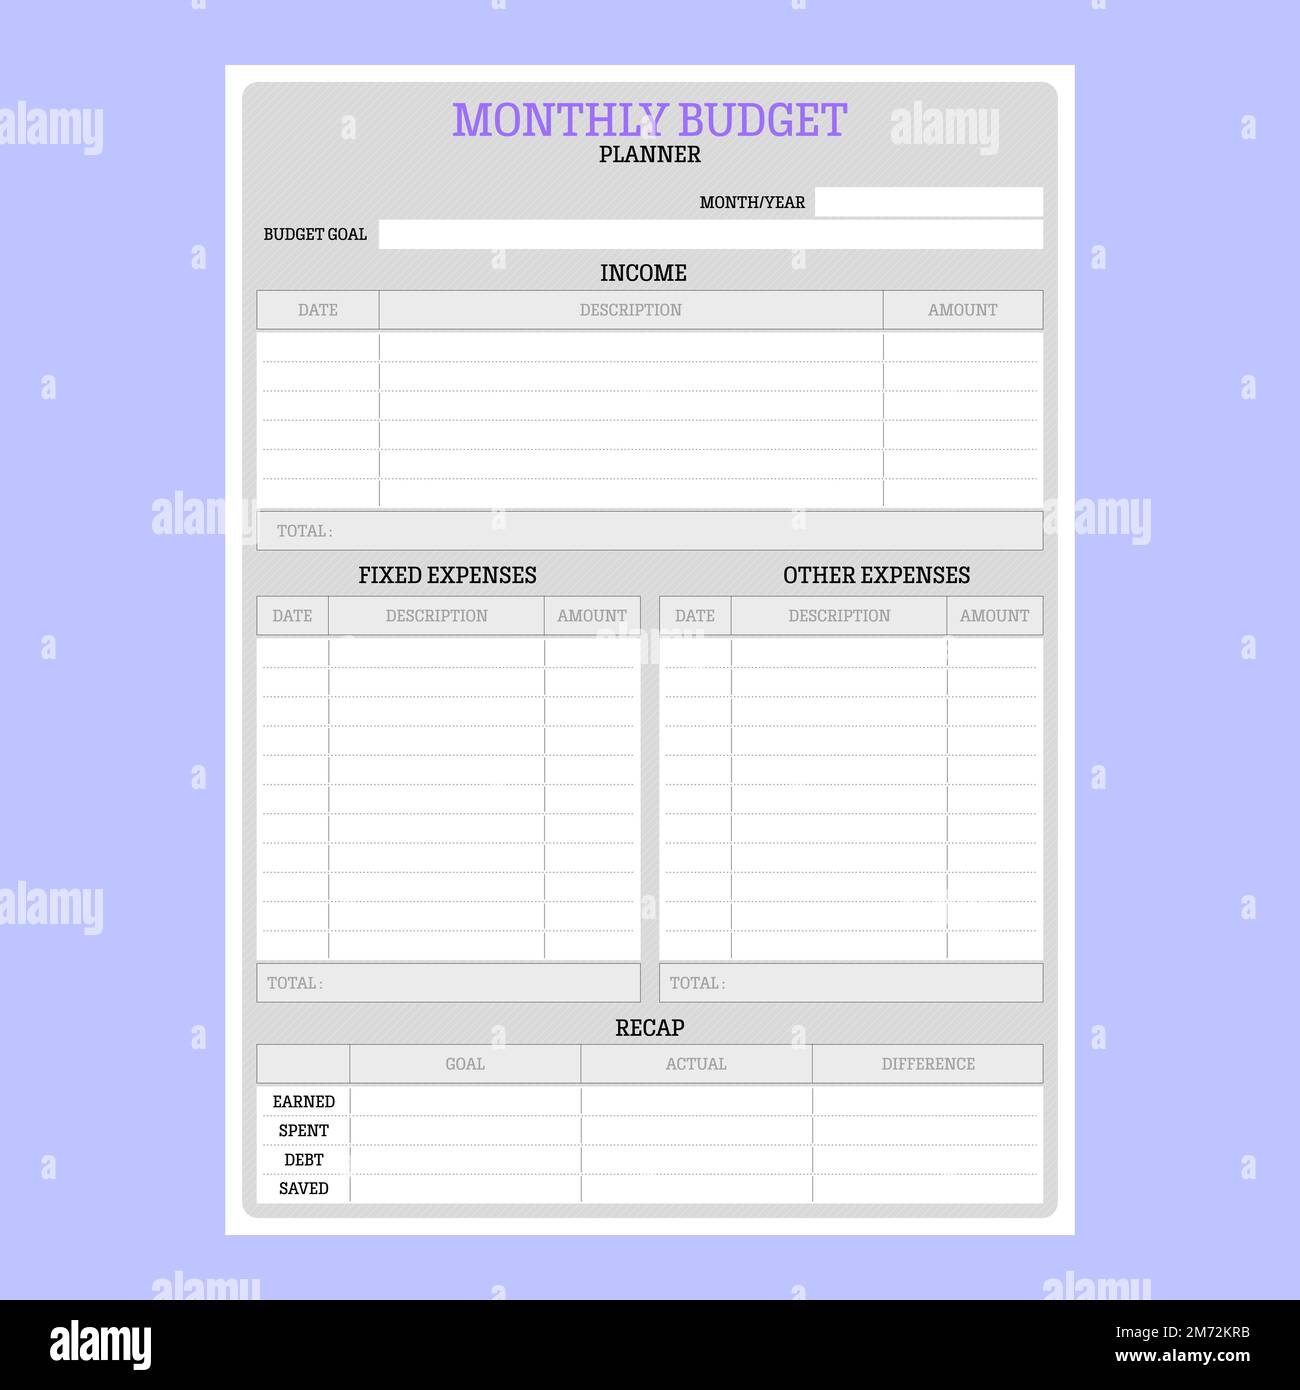 monthly budget planner made in paper style  Stock Vector